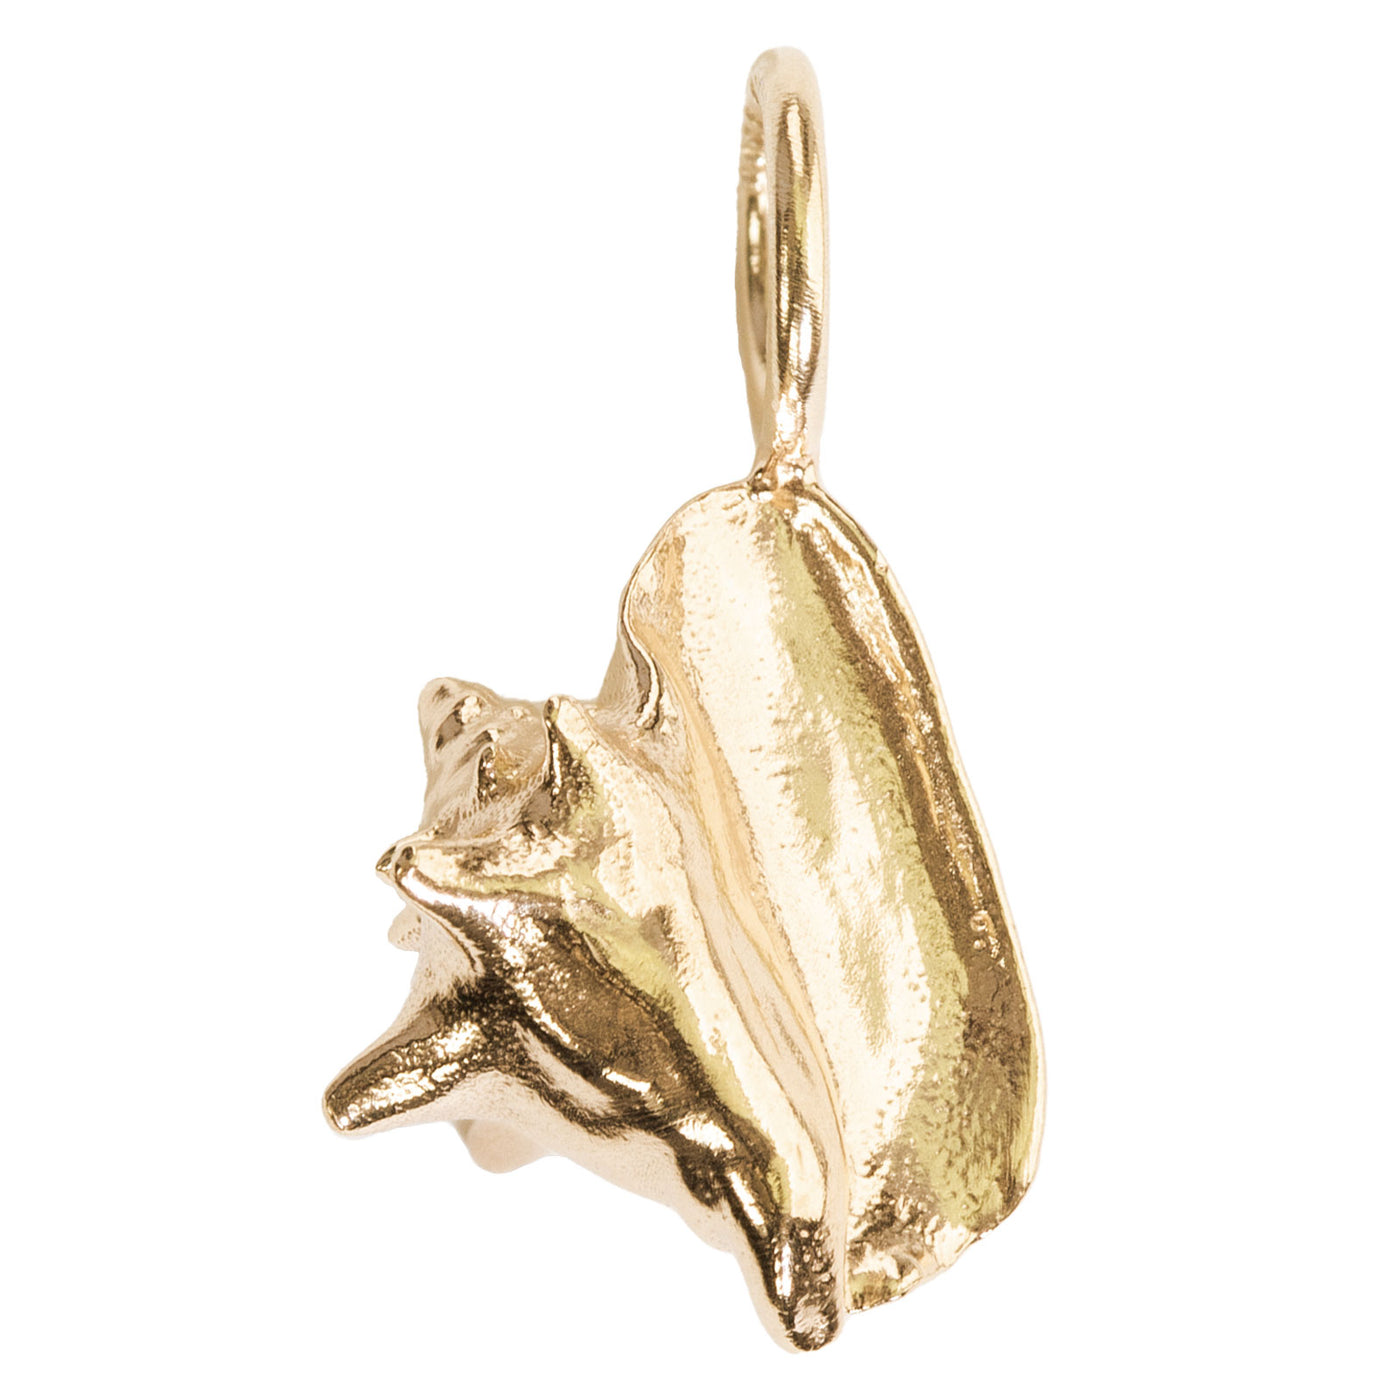 Gold Polished Conch Shell Sculptural Charm